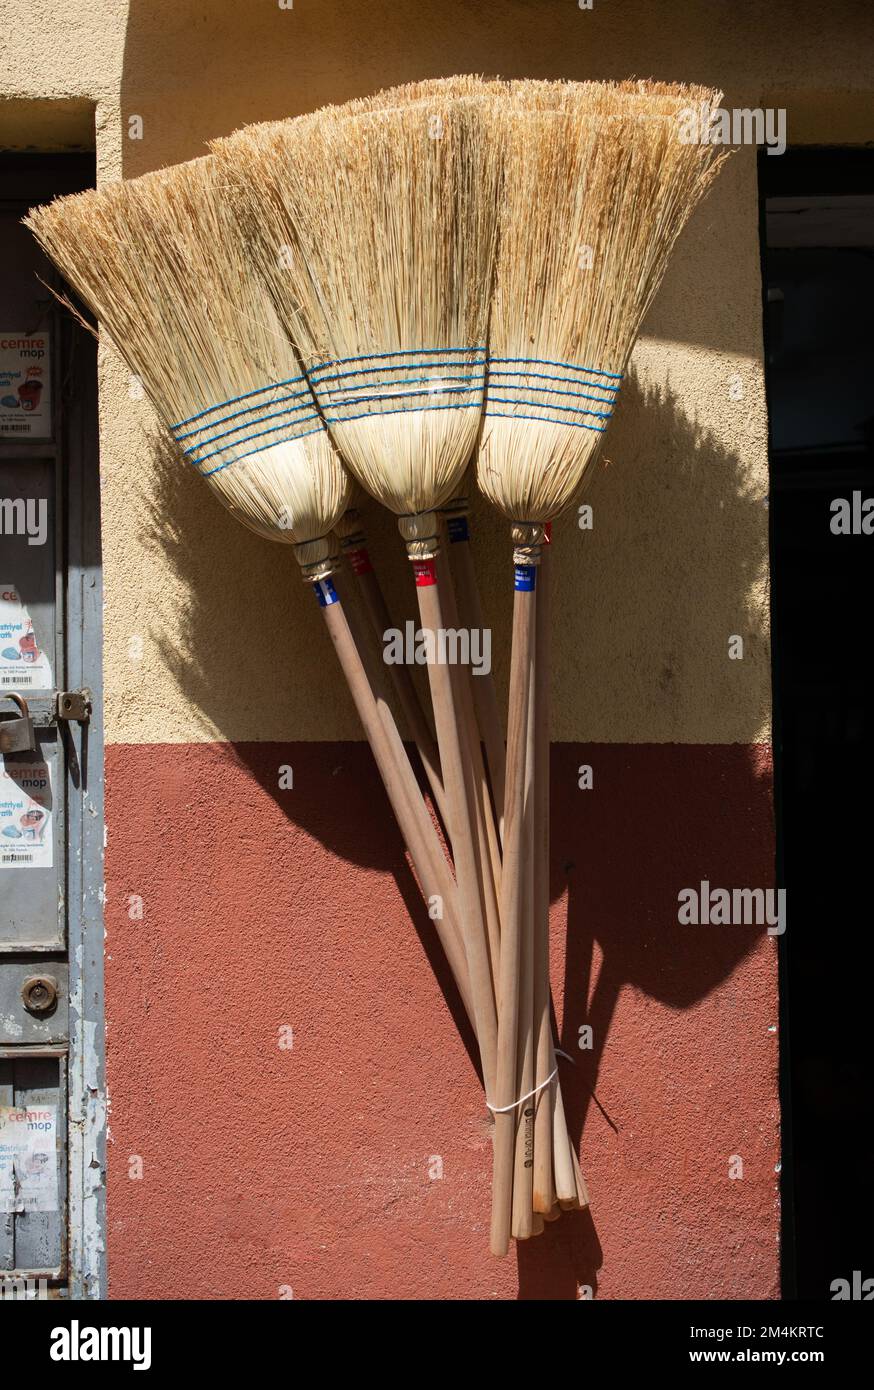 A verticl shot of a set of brooms hanging on the wall under the sunlight Stock Photo